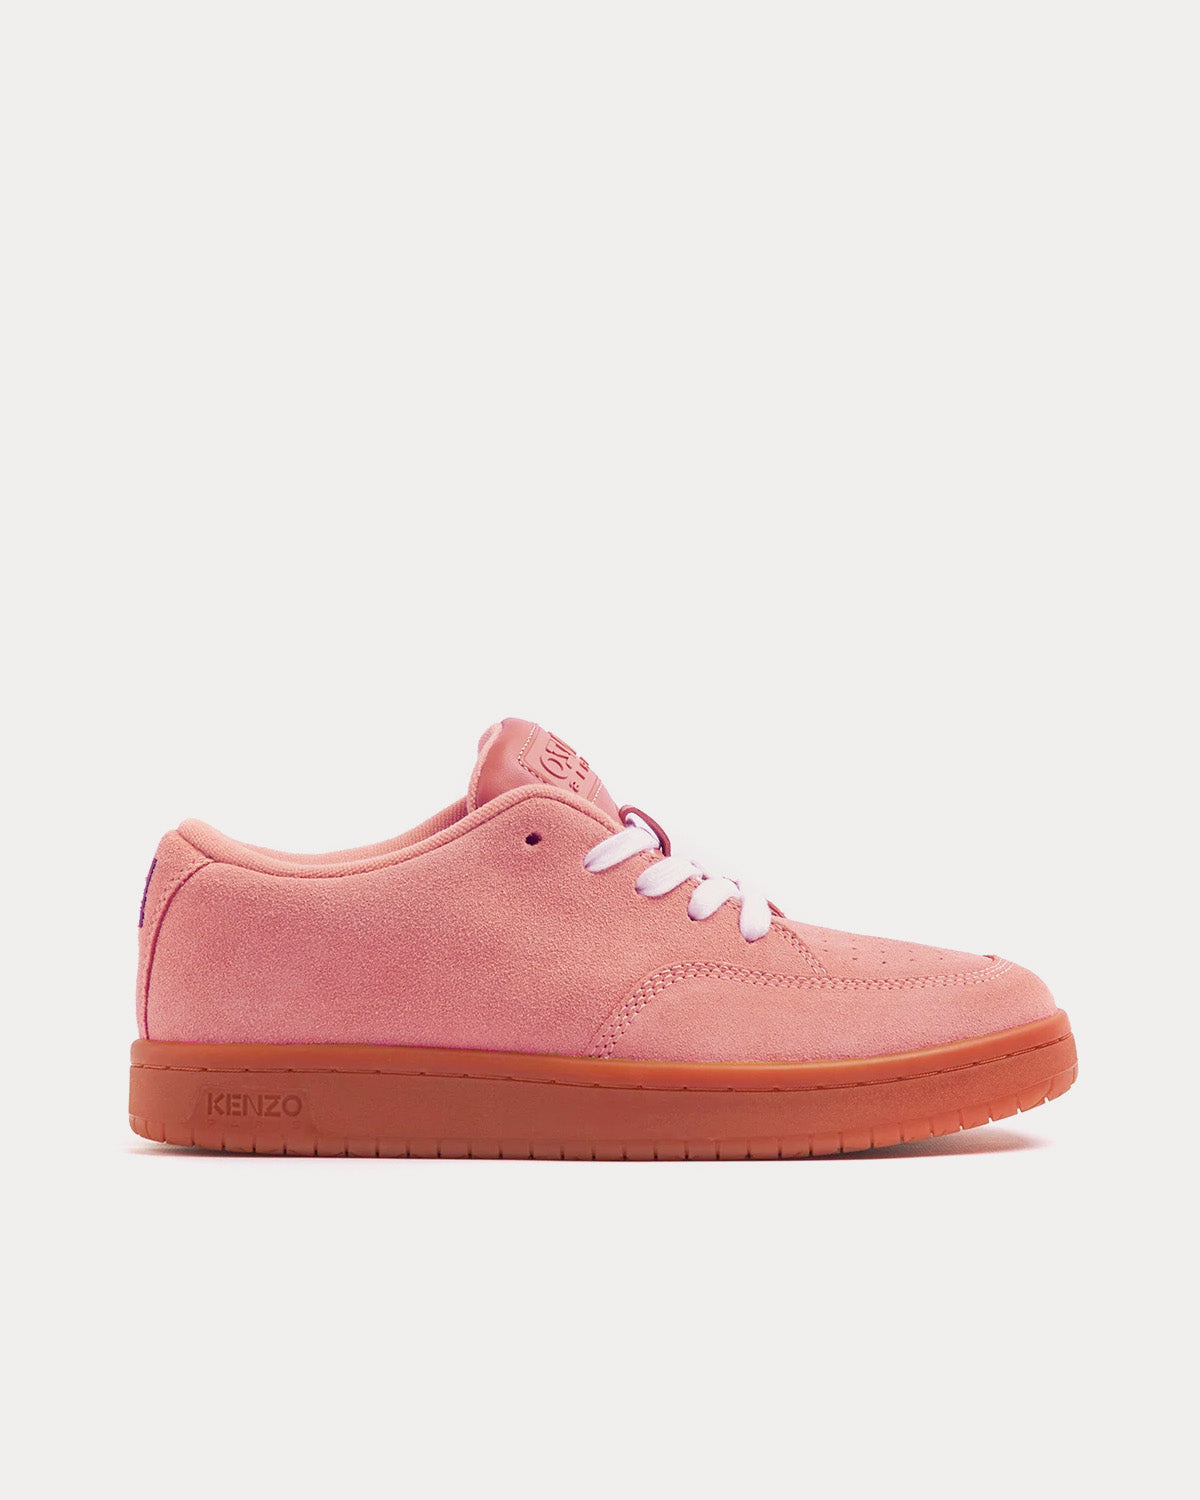 Kenzo - Dome Suede Pink Low Top Sneakers